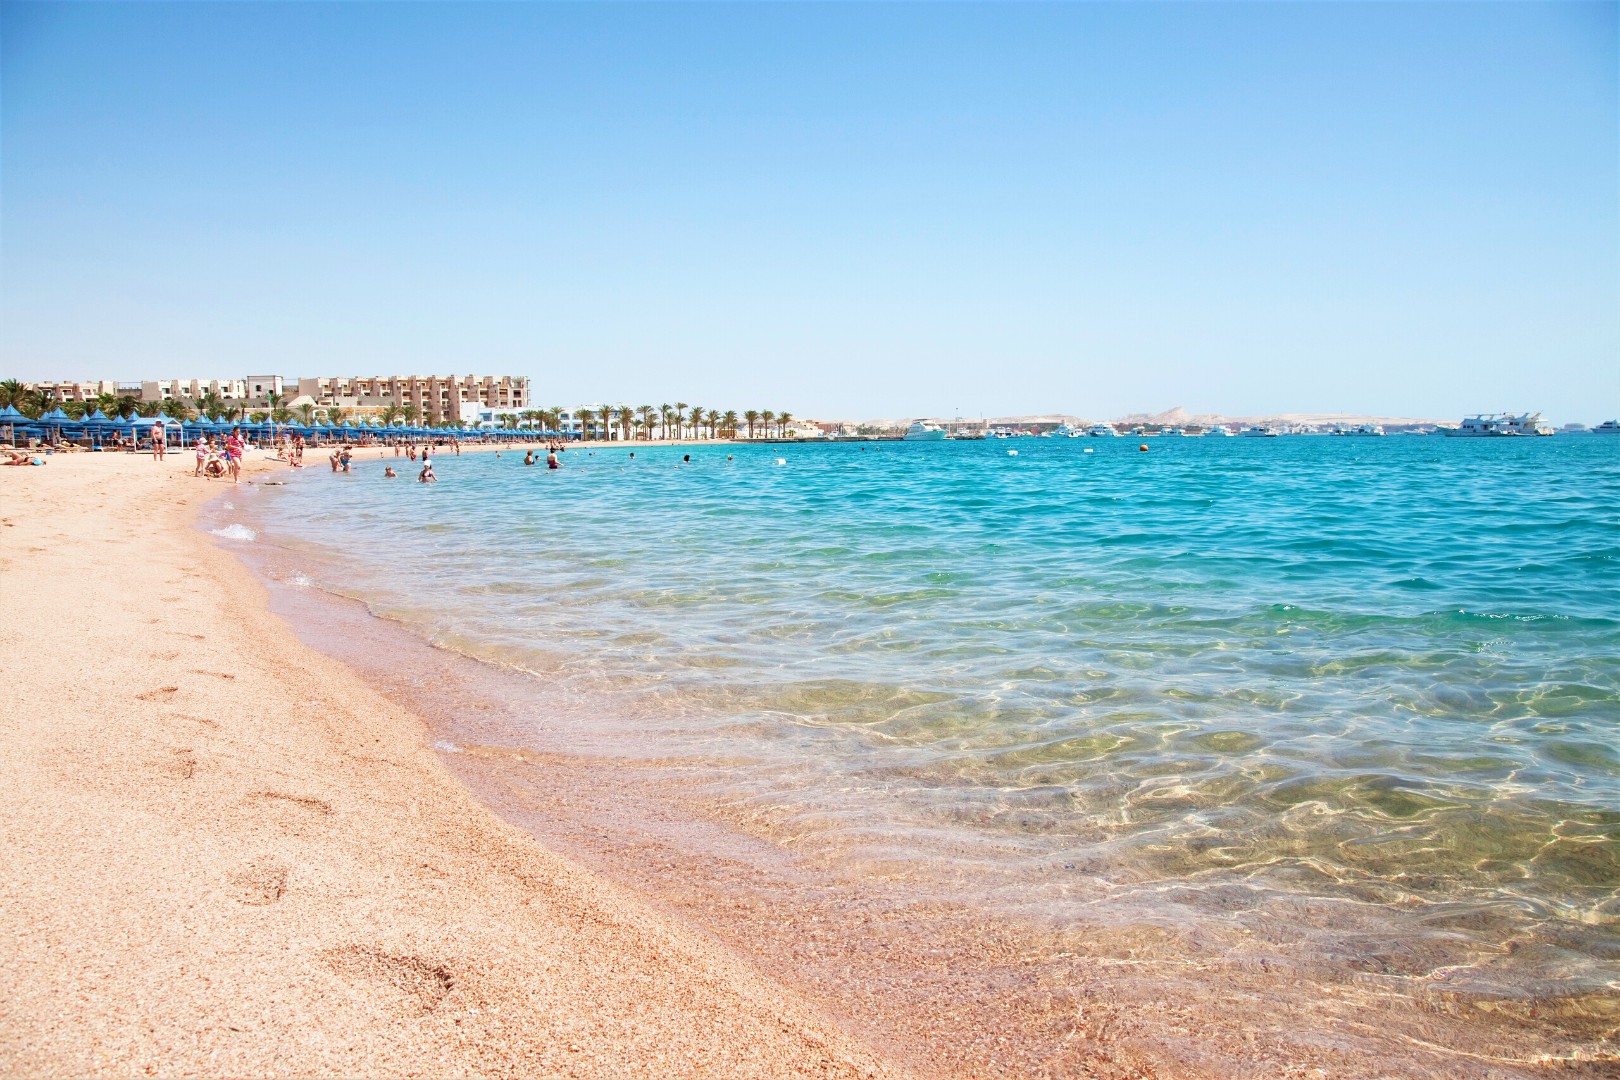 Hurghada with its Red Sea Hotels is ideal for vacation